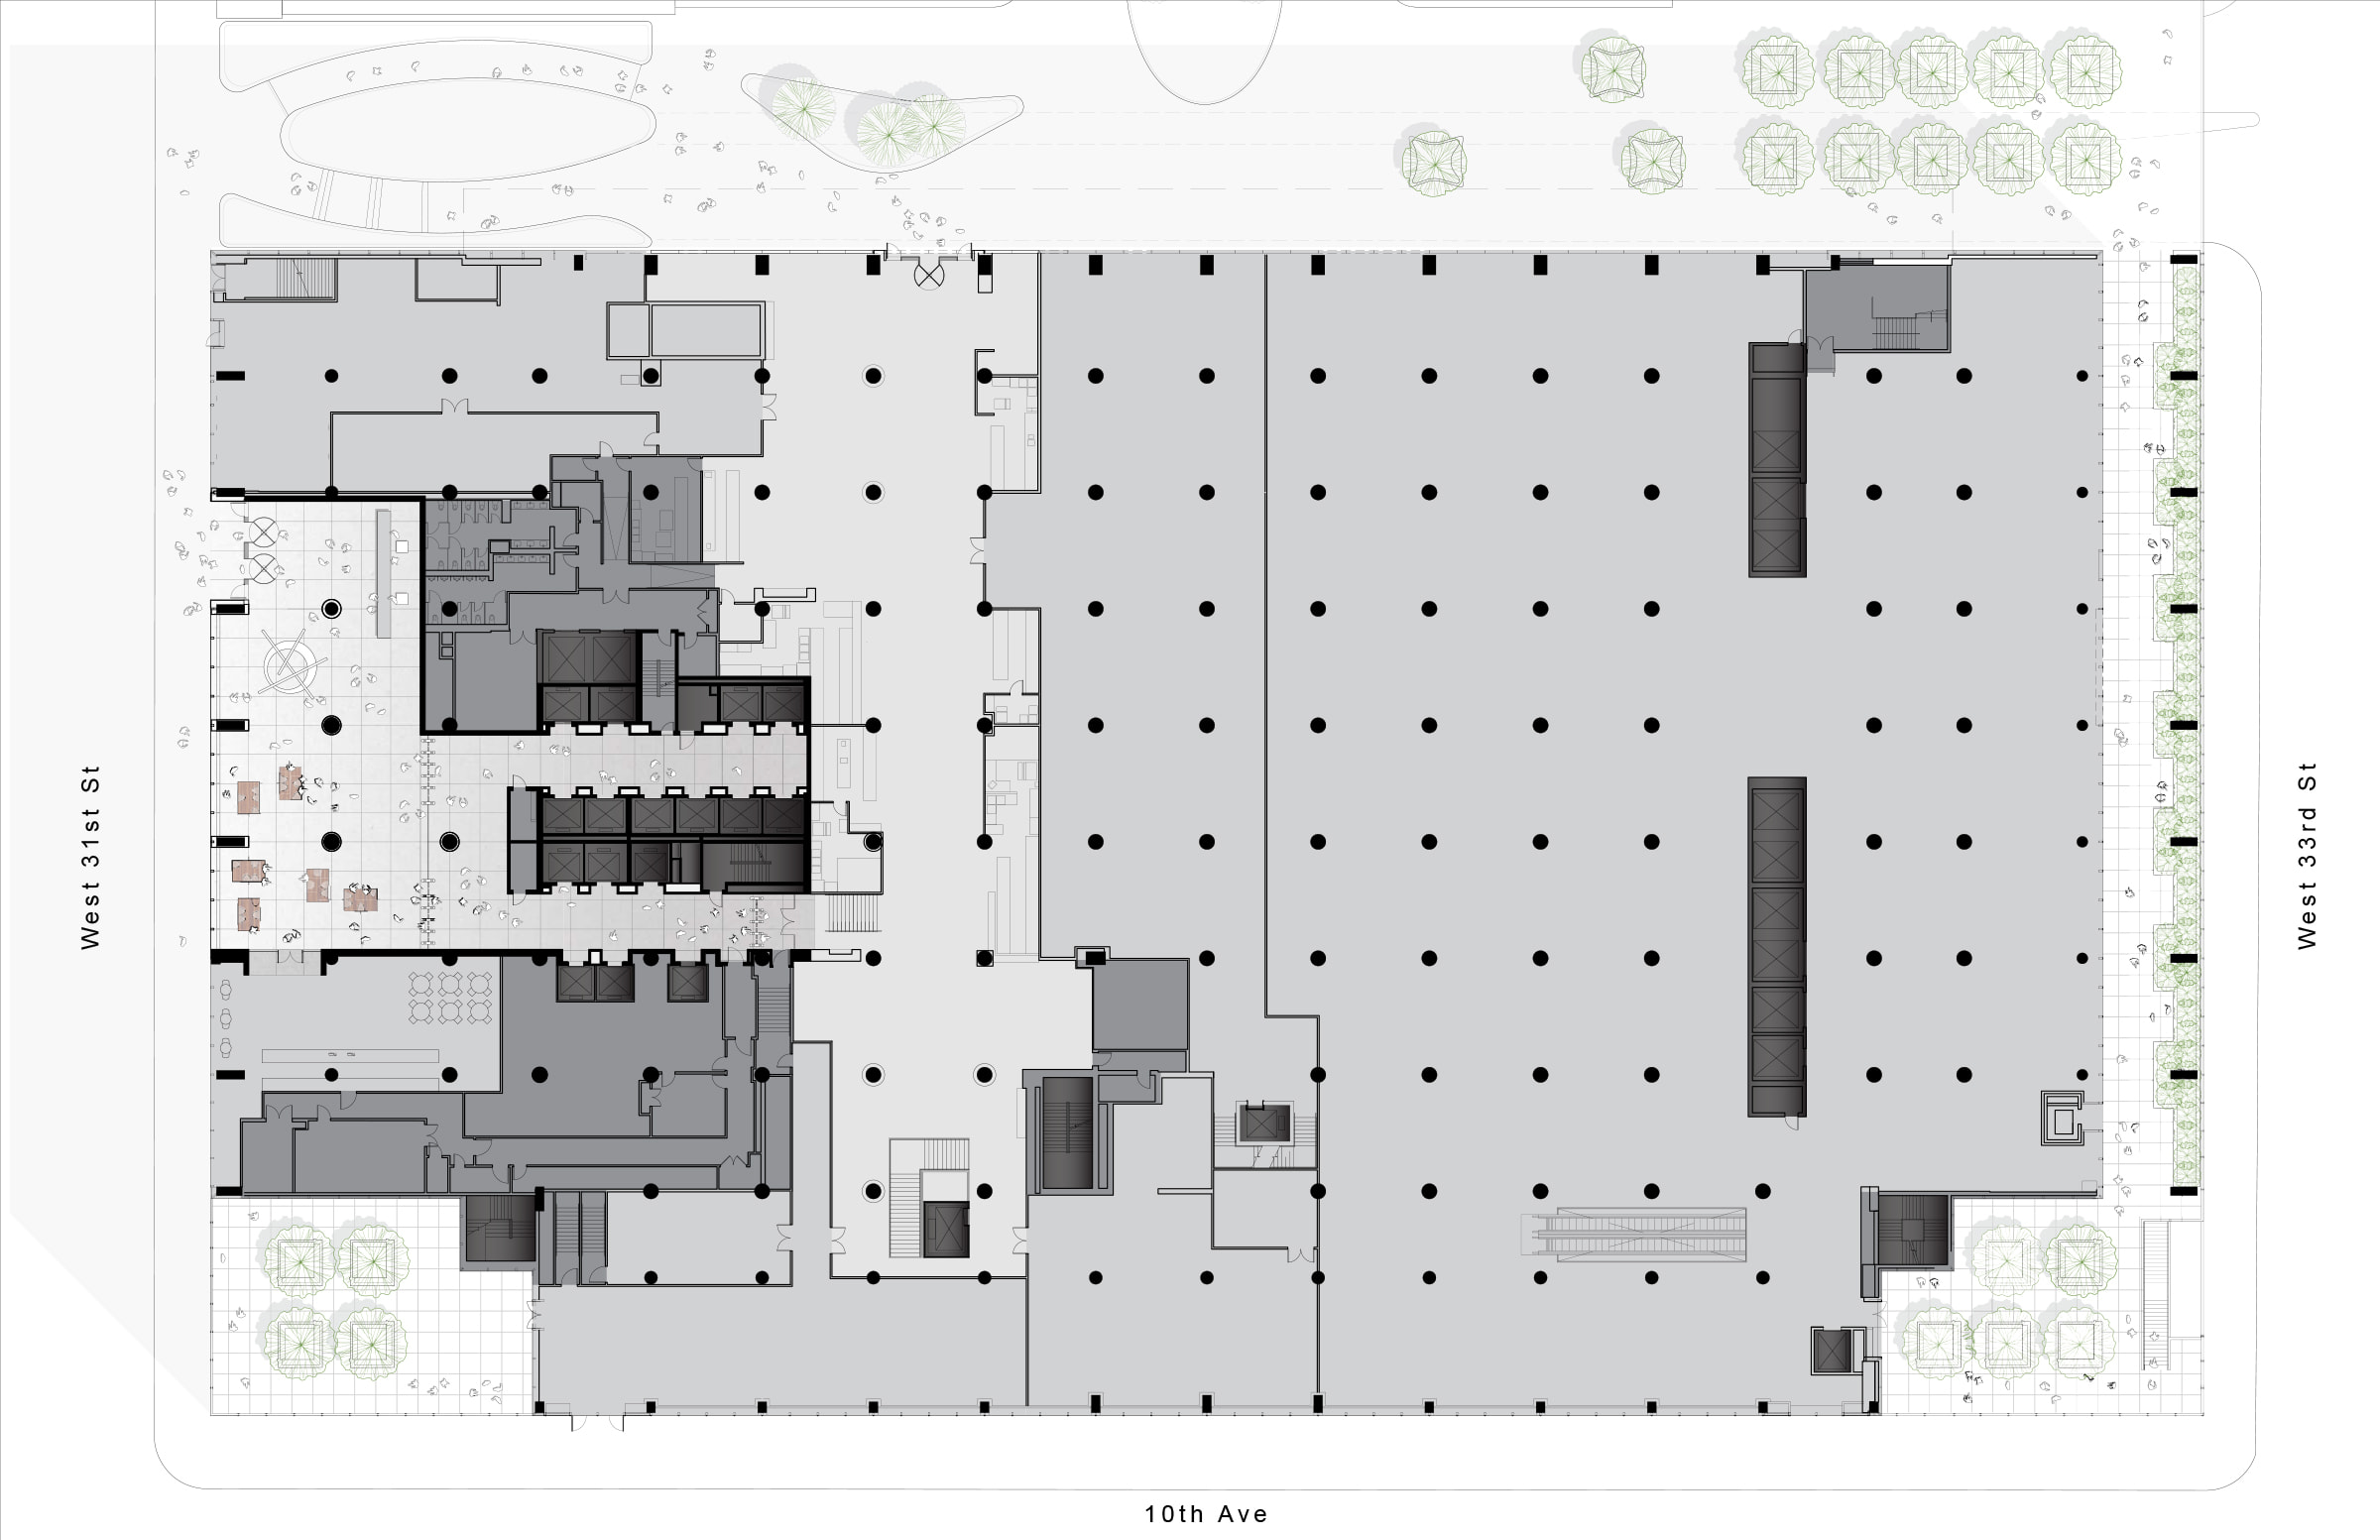 An image of the Lobby entry floor plan.